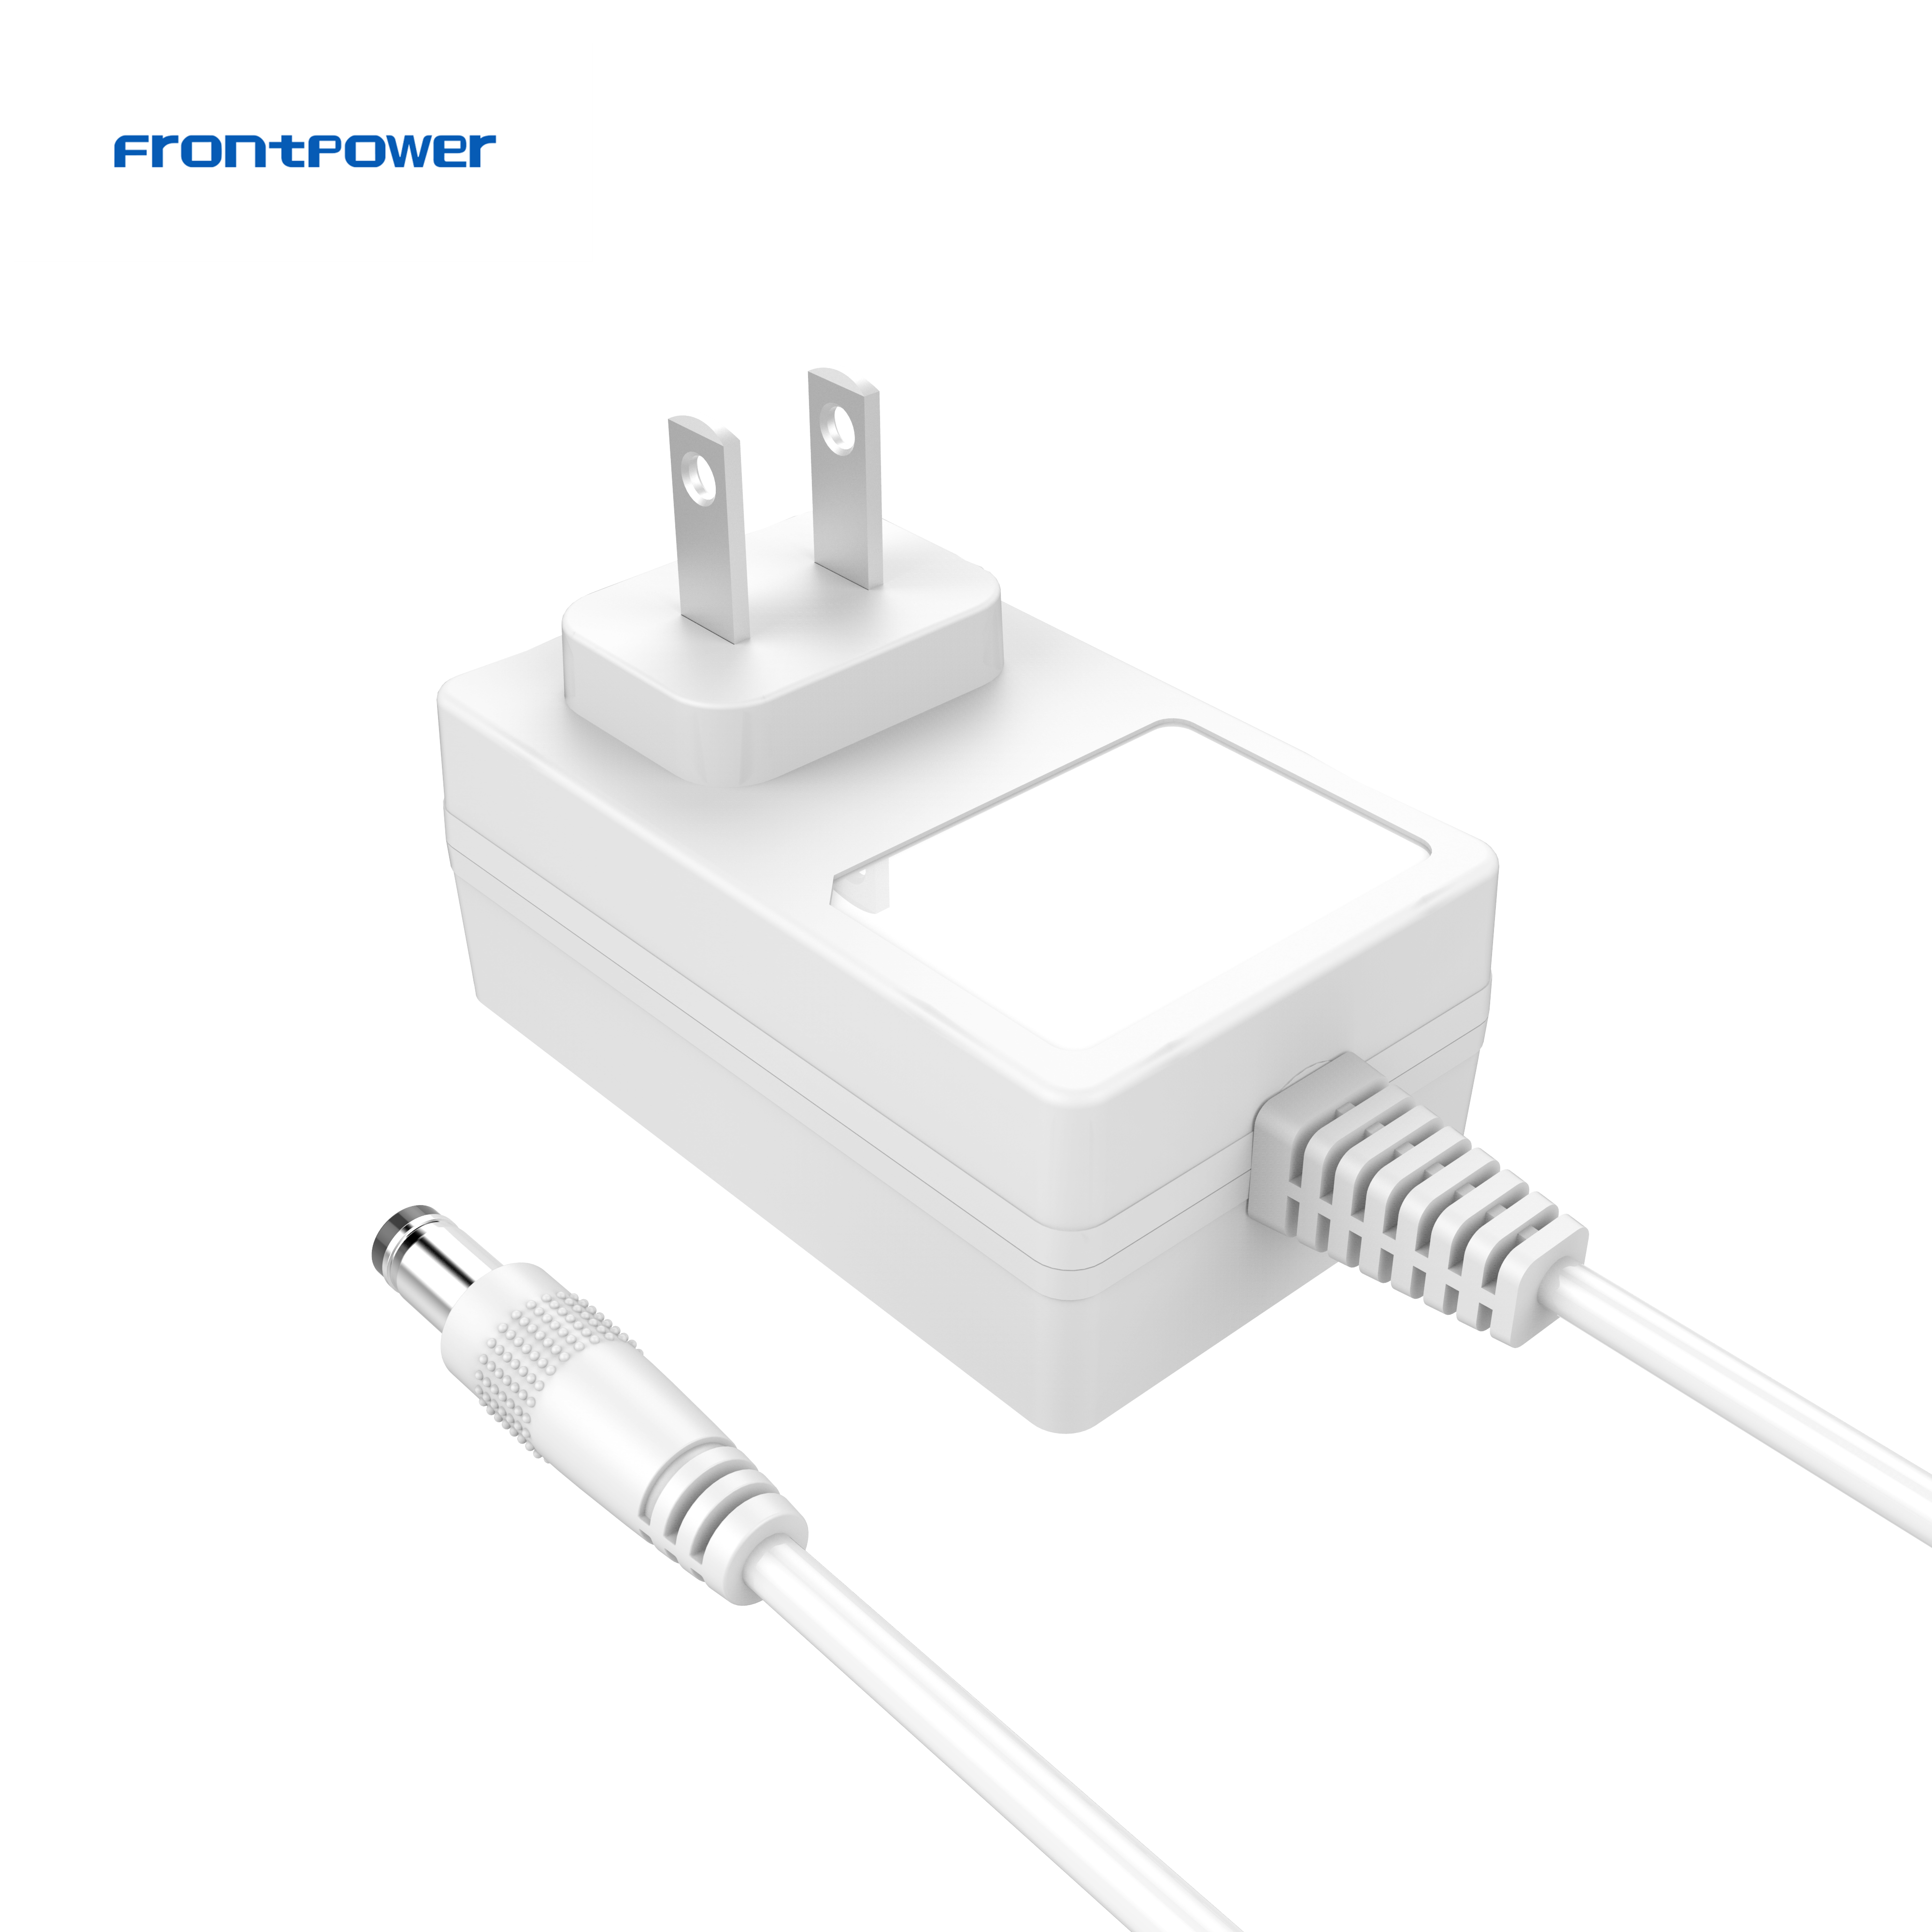 Frontpower wall plug power adaptor 5V 3A 3.5A 24V1A 24W 12V 2A adapter with UL CE GS FCC CB LVD EMC KC PSE CCC certs